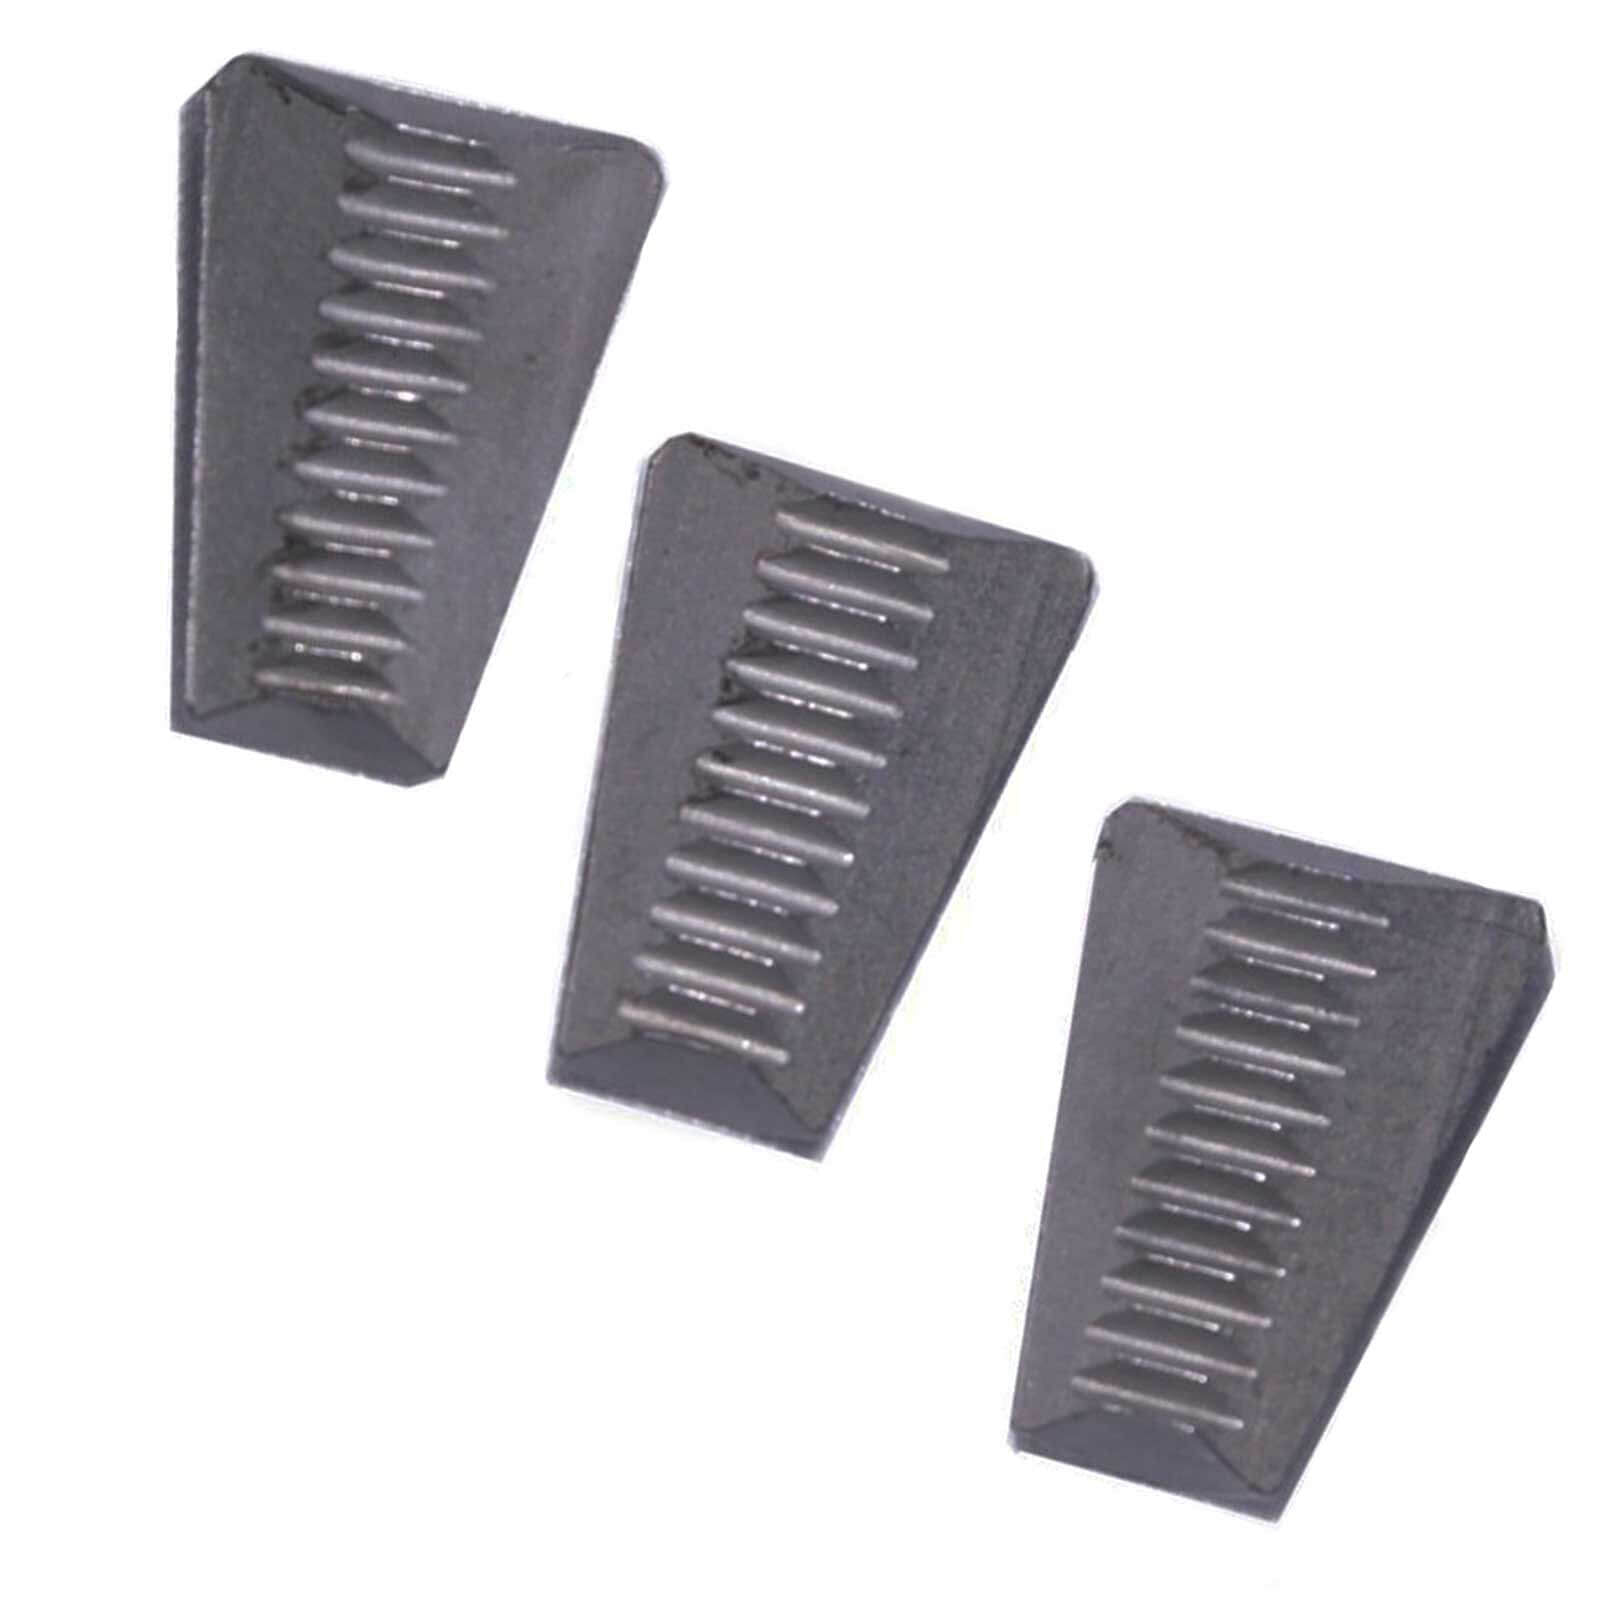 Pack of 3 Faithfull Set Jaws For Long Arm & Lazy Tong Riveters 